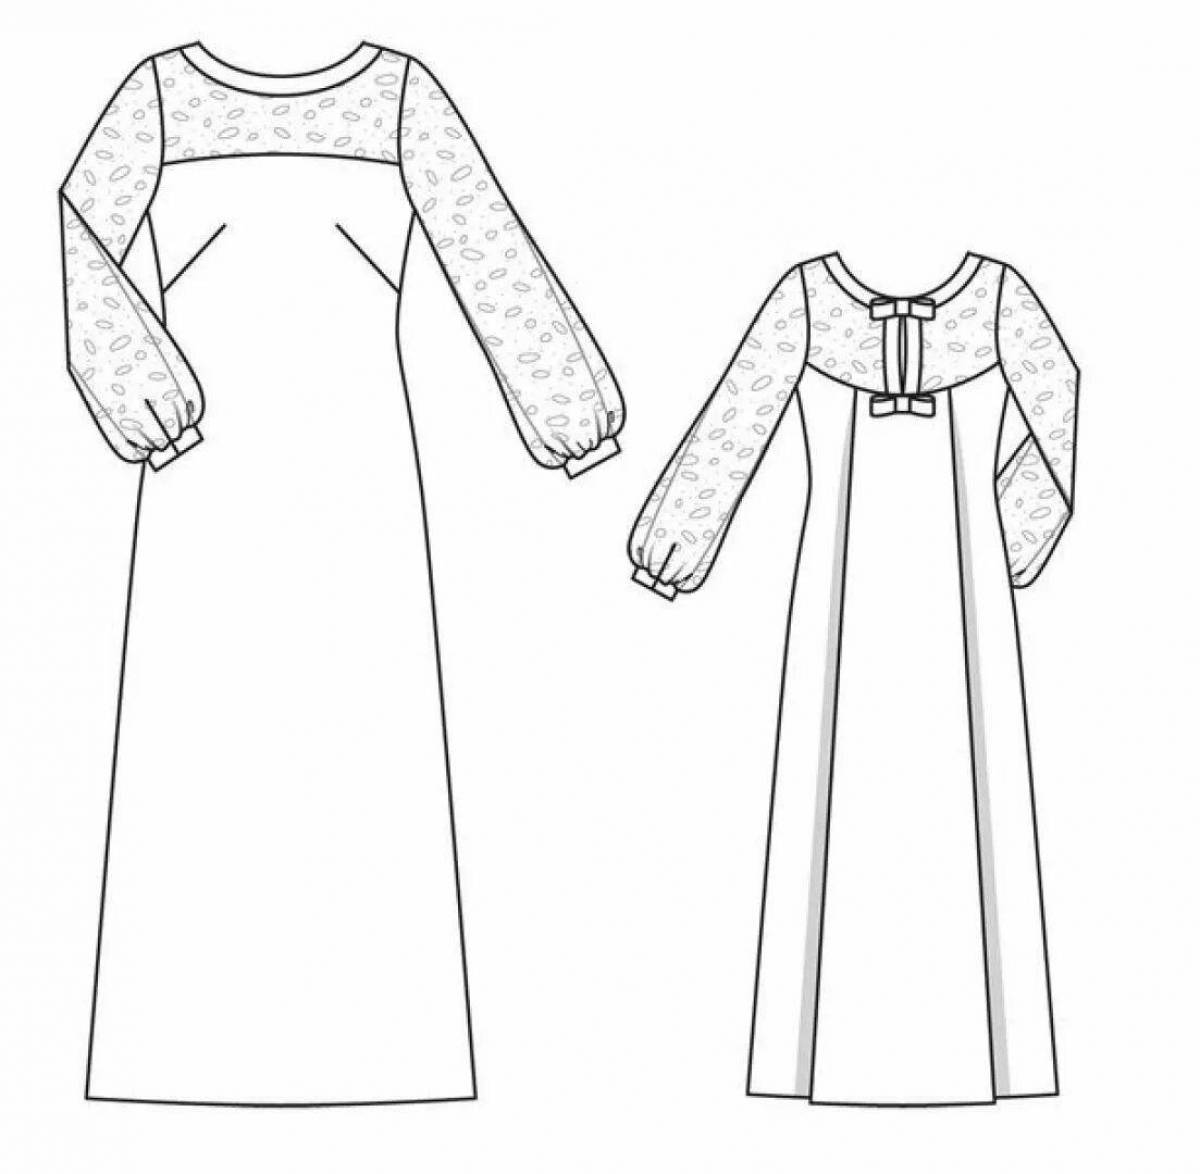 Coloring page decorated Russian sundress